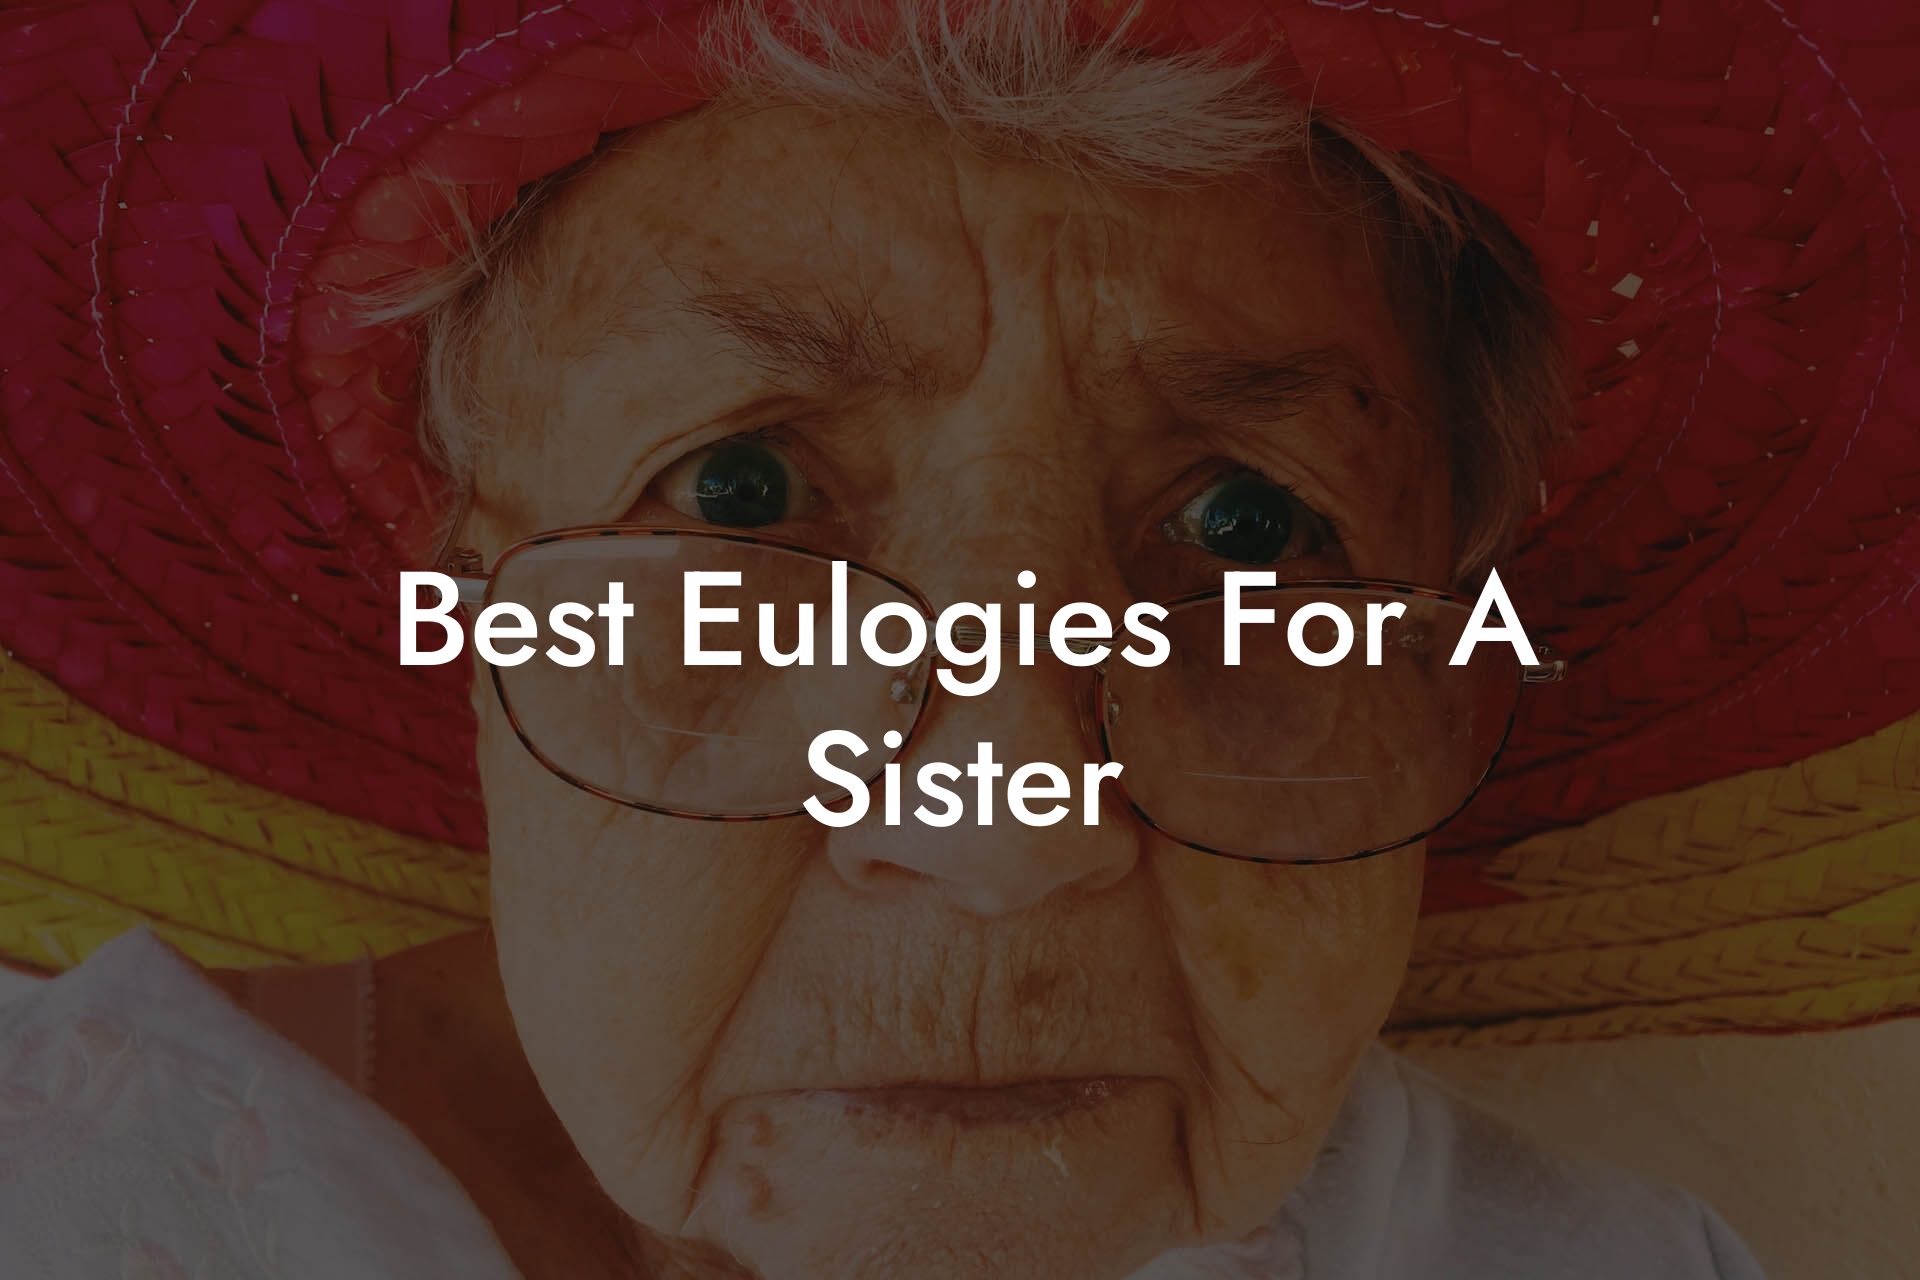 Best Eulogies For A Sister